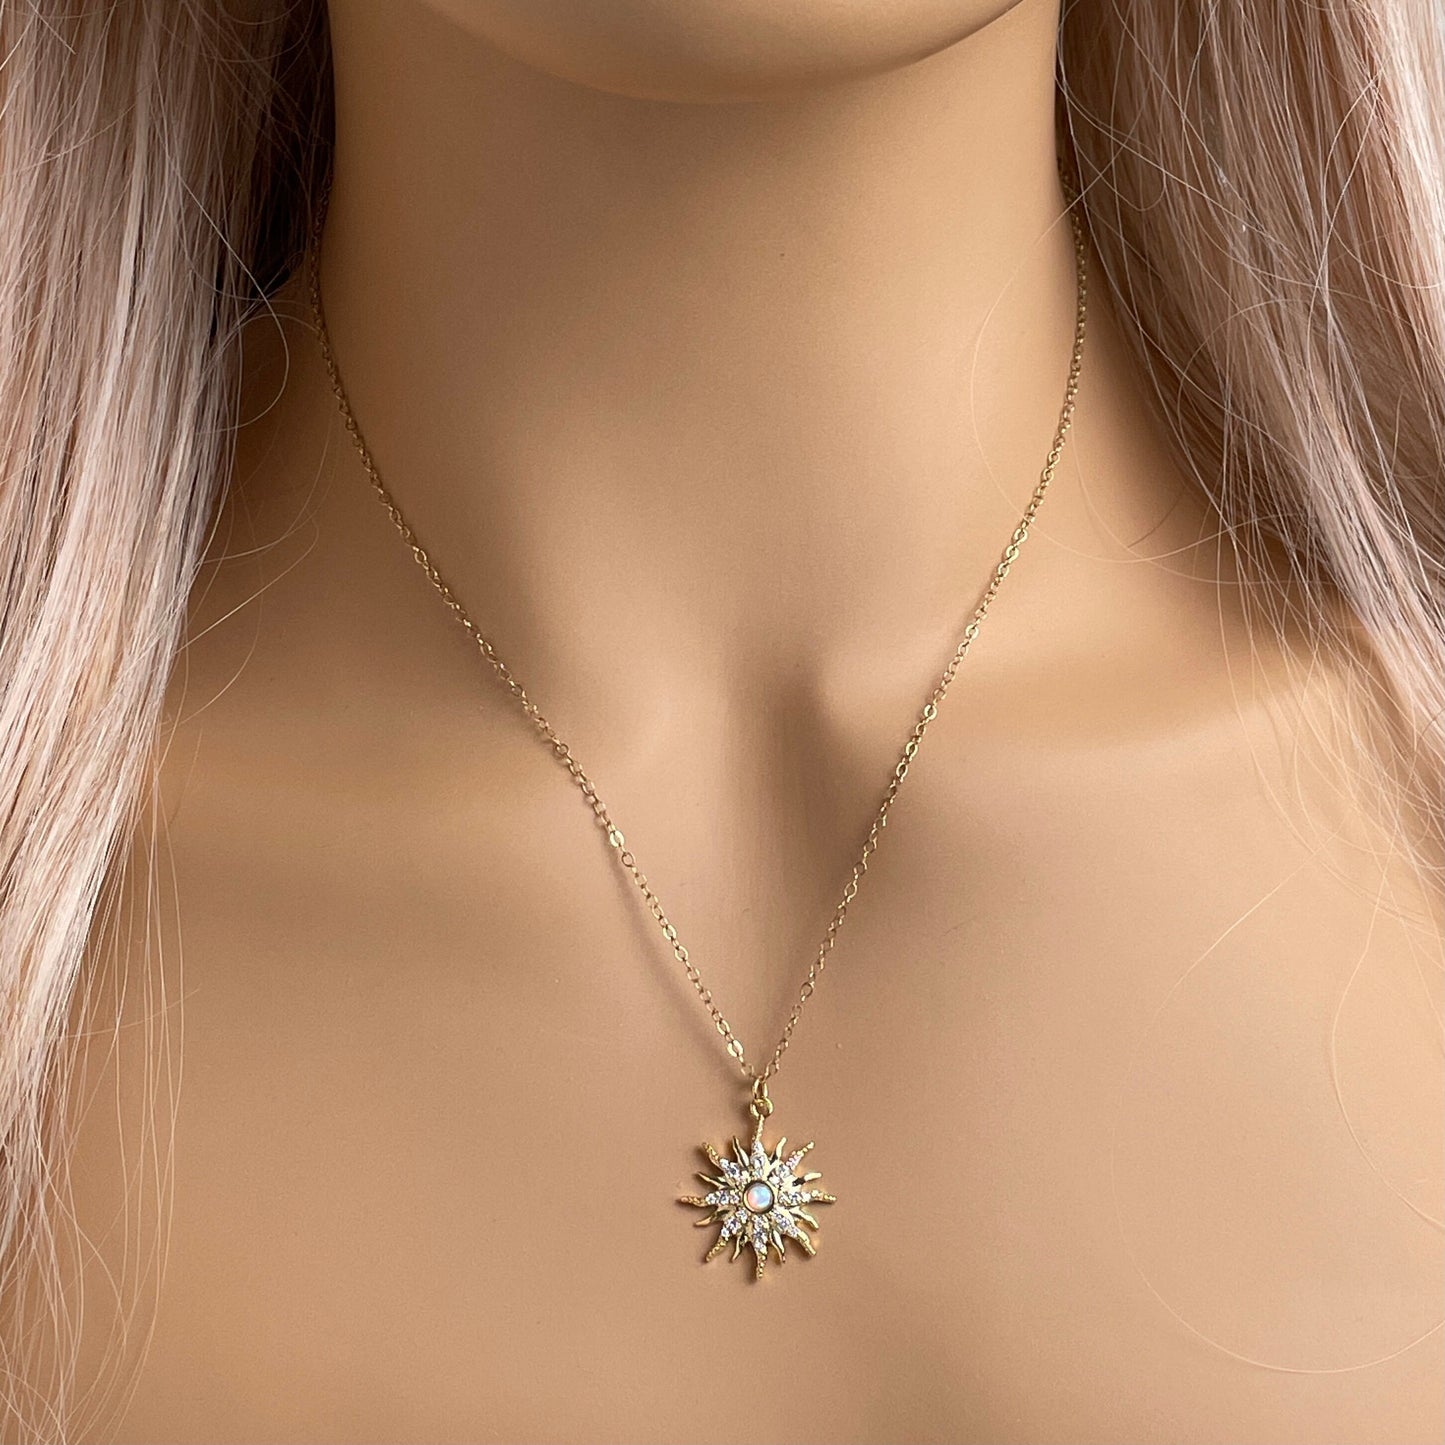 Opal Sun Necklace Gold, October Birthstone Charm, Zircon Sun Burst Pendant, Gifts For Her, M5-390